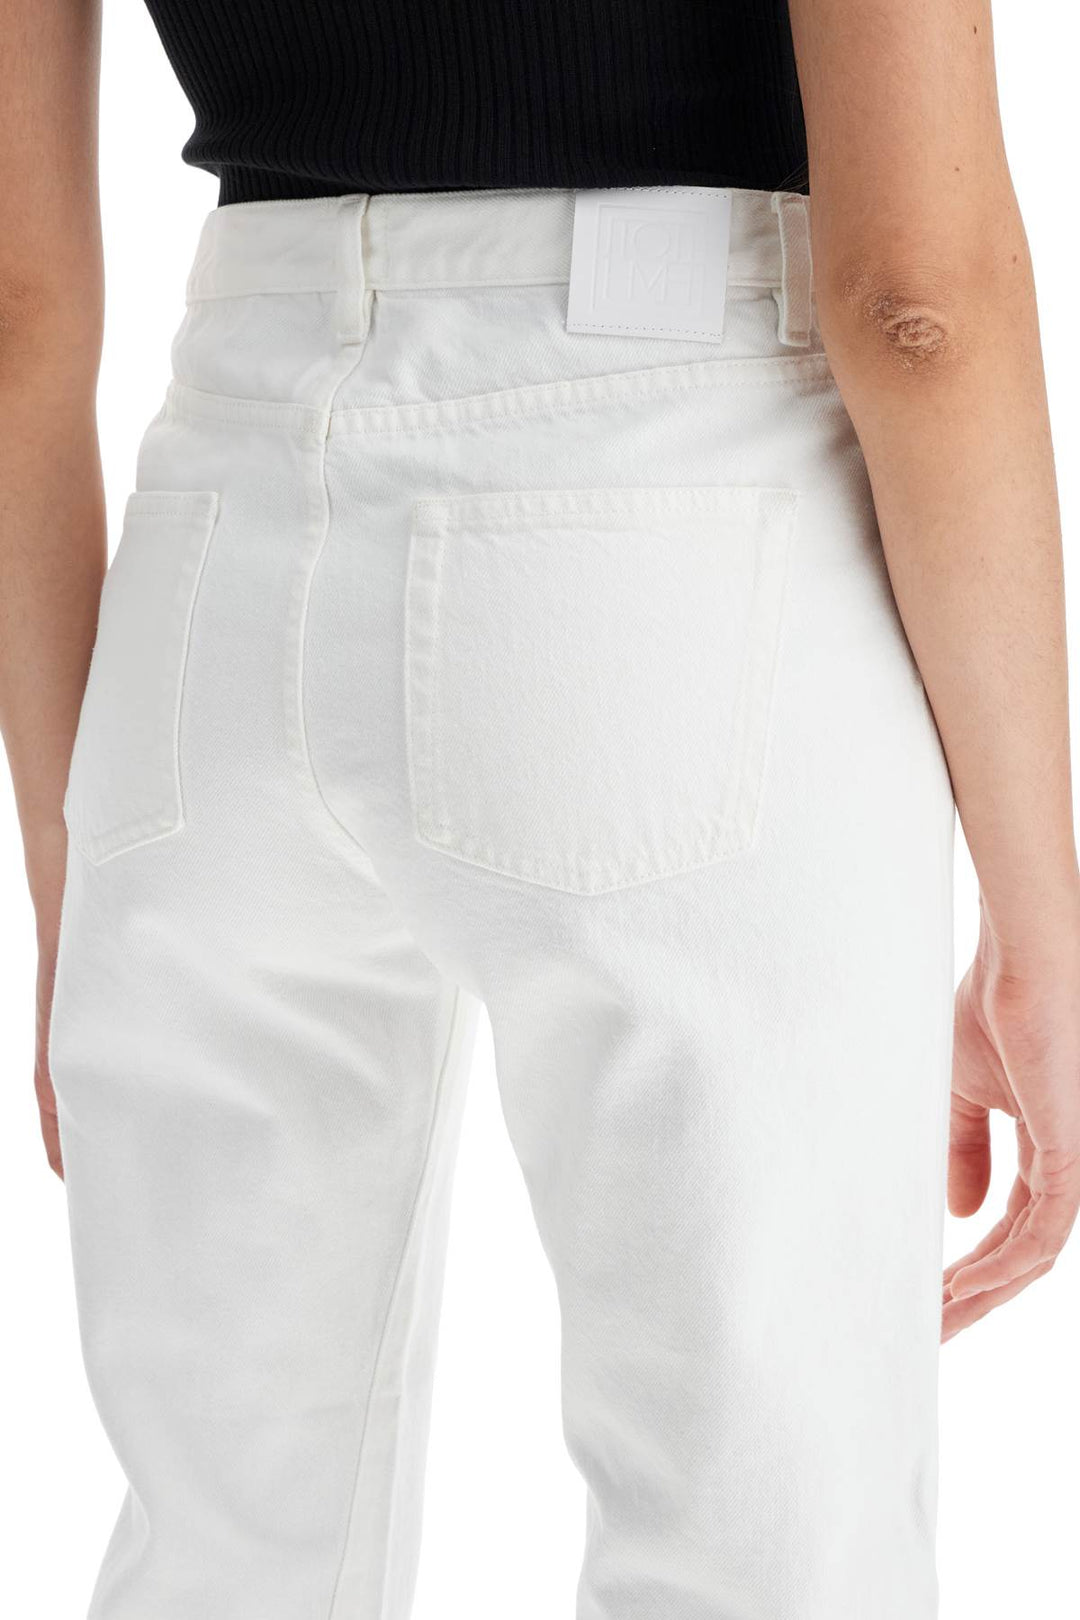 Toteme Twisted Seam Cropped Jeans   White